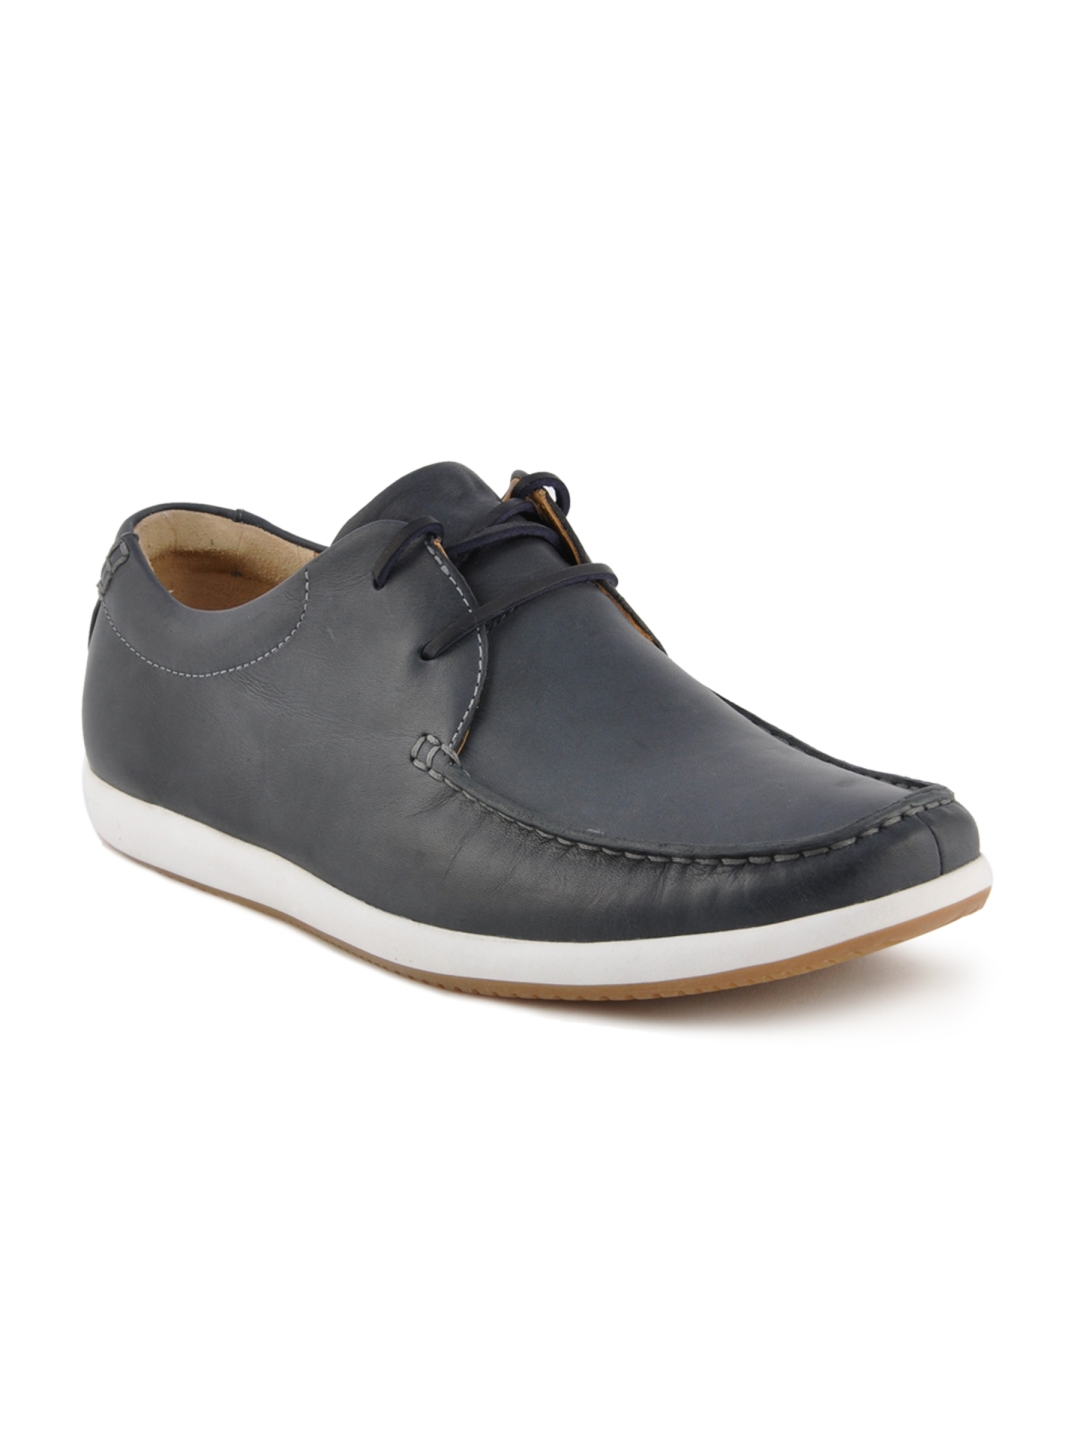 Buy Clarks Men Navy Blue Leather Casual Shoes - Casual Shoes for Men ...